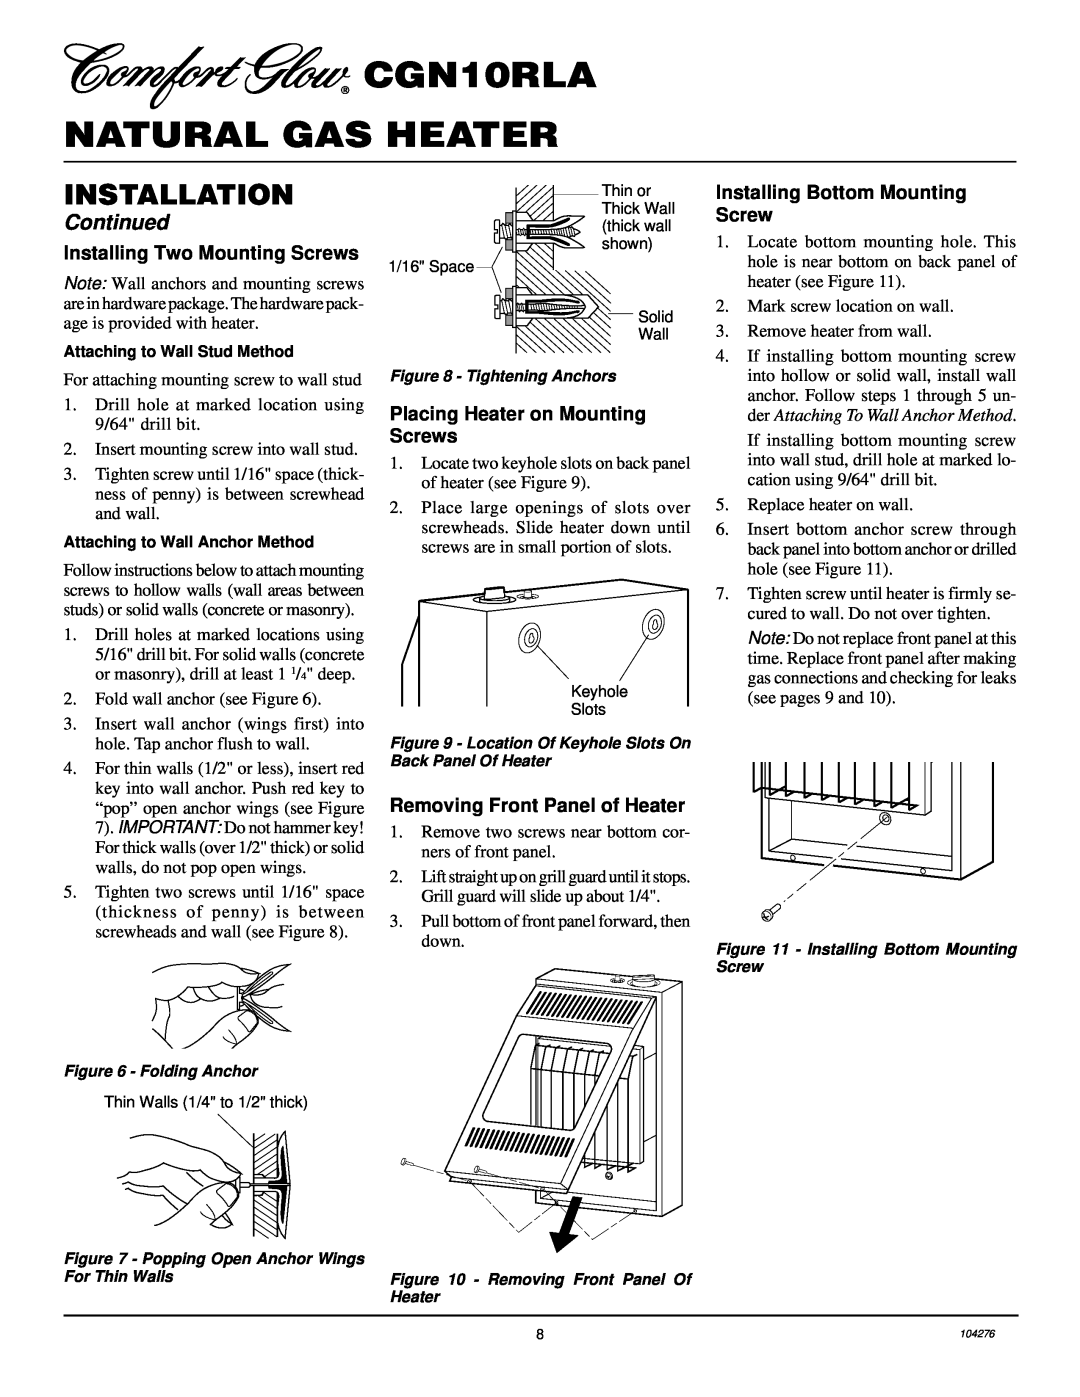 Desa installation manual CGN10RLA NATURAL GAS HEATER, Installation, Continued, Installing Two Mounting Screws 